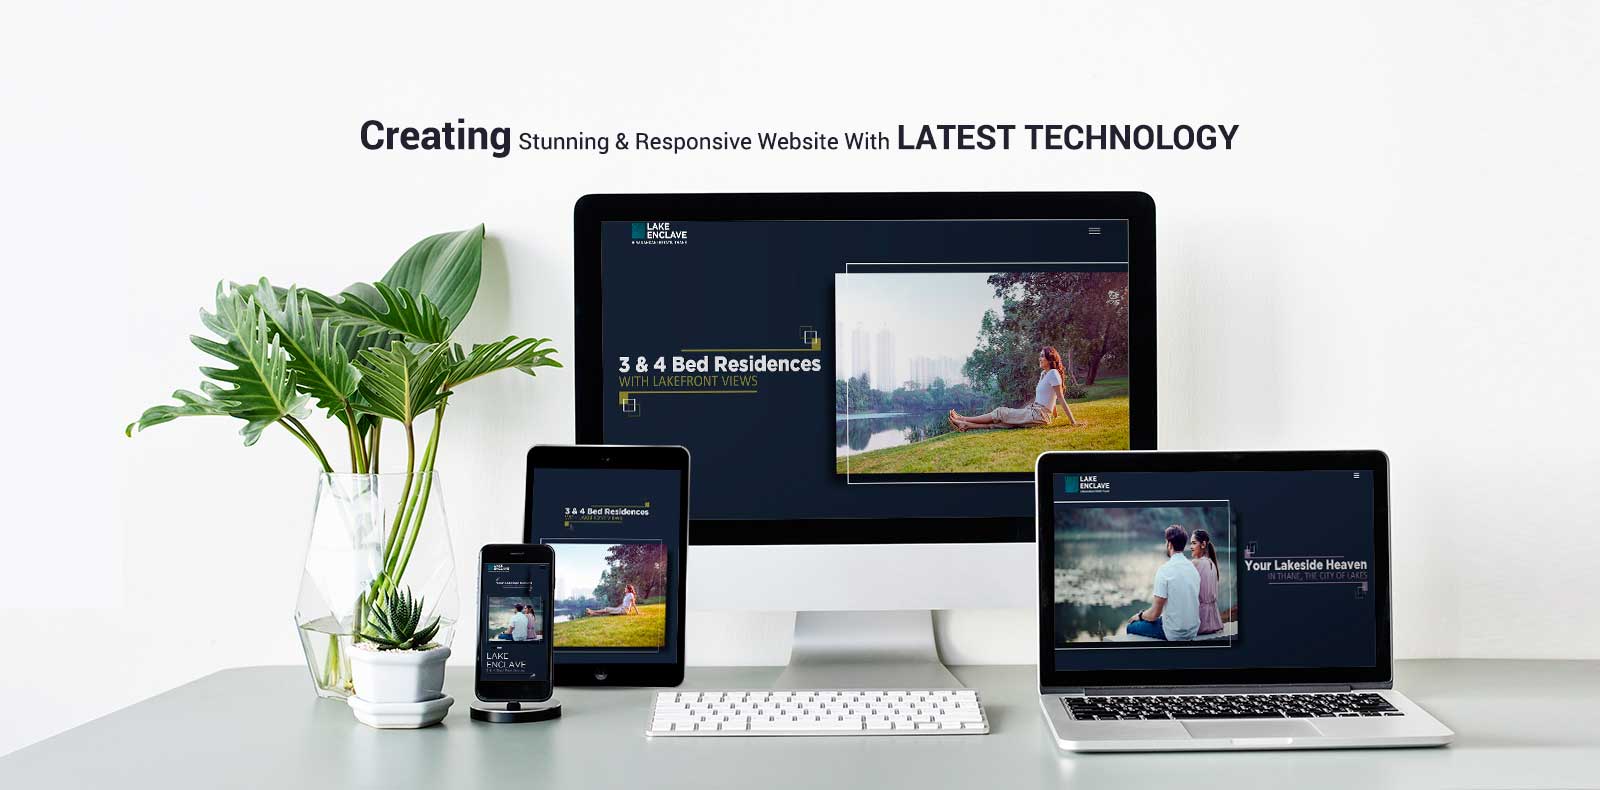 Responsive Websites with Latest Technology